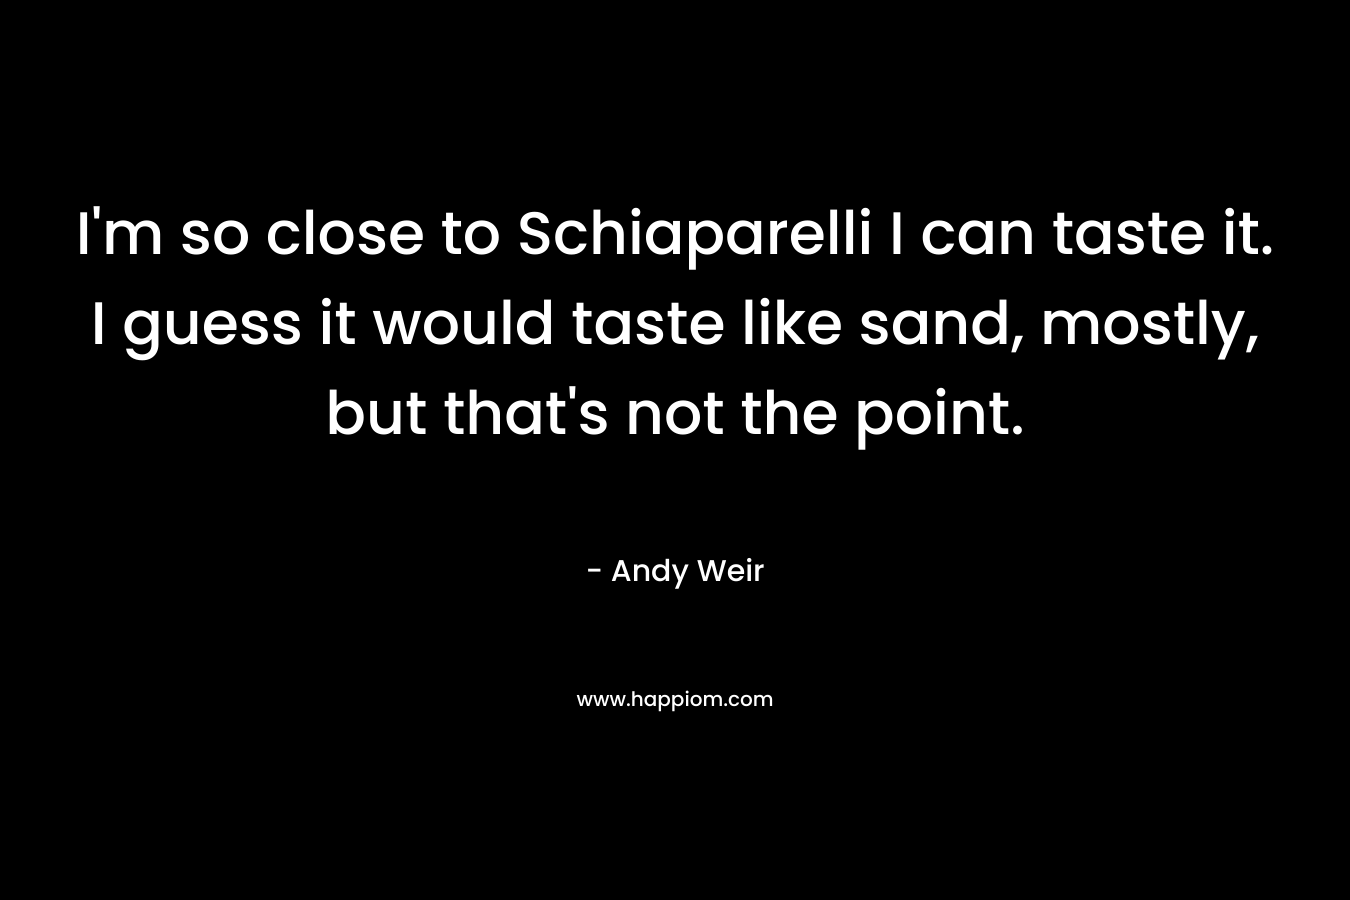 I'm so close to Schiaparelli I can taste it. I guess it would taste like sand, mostly, but that's not the point.